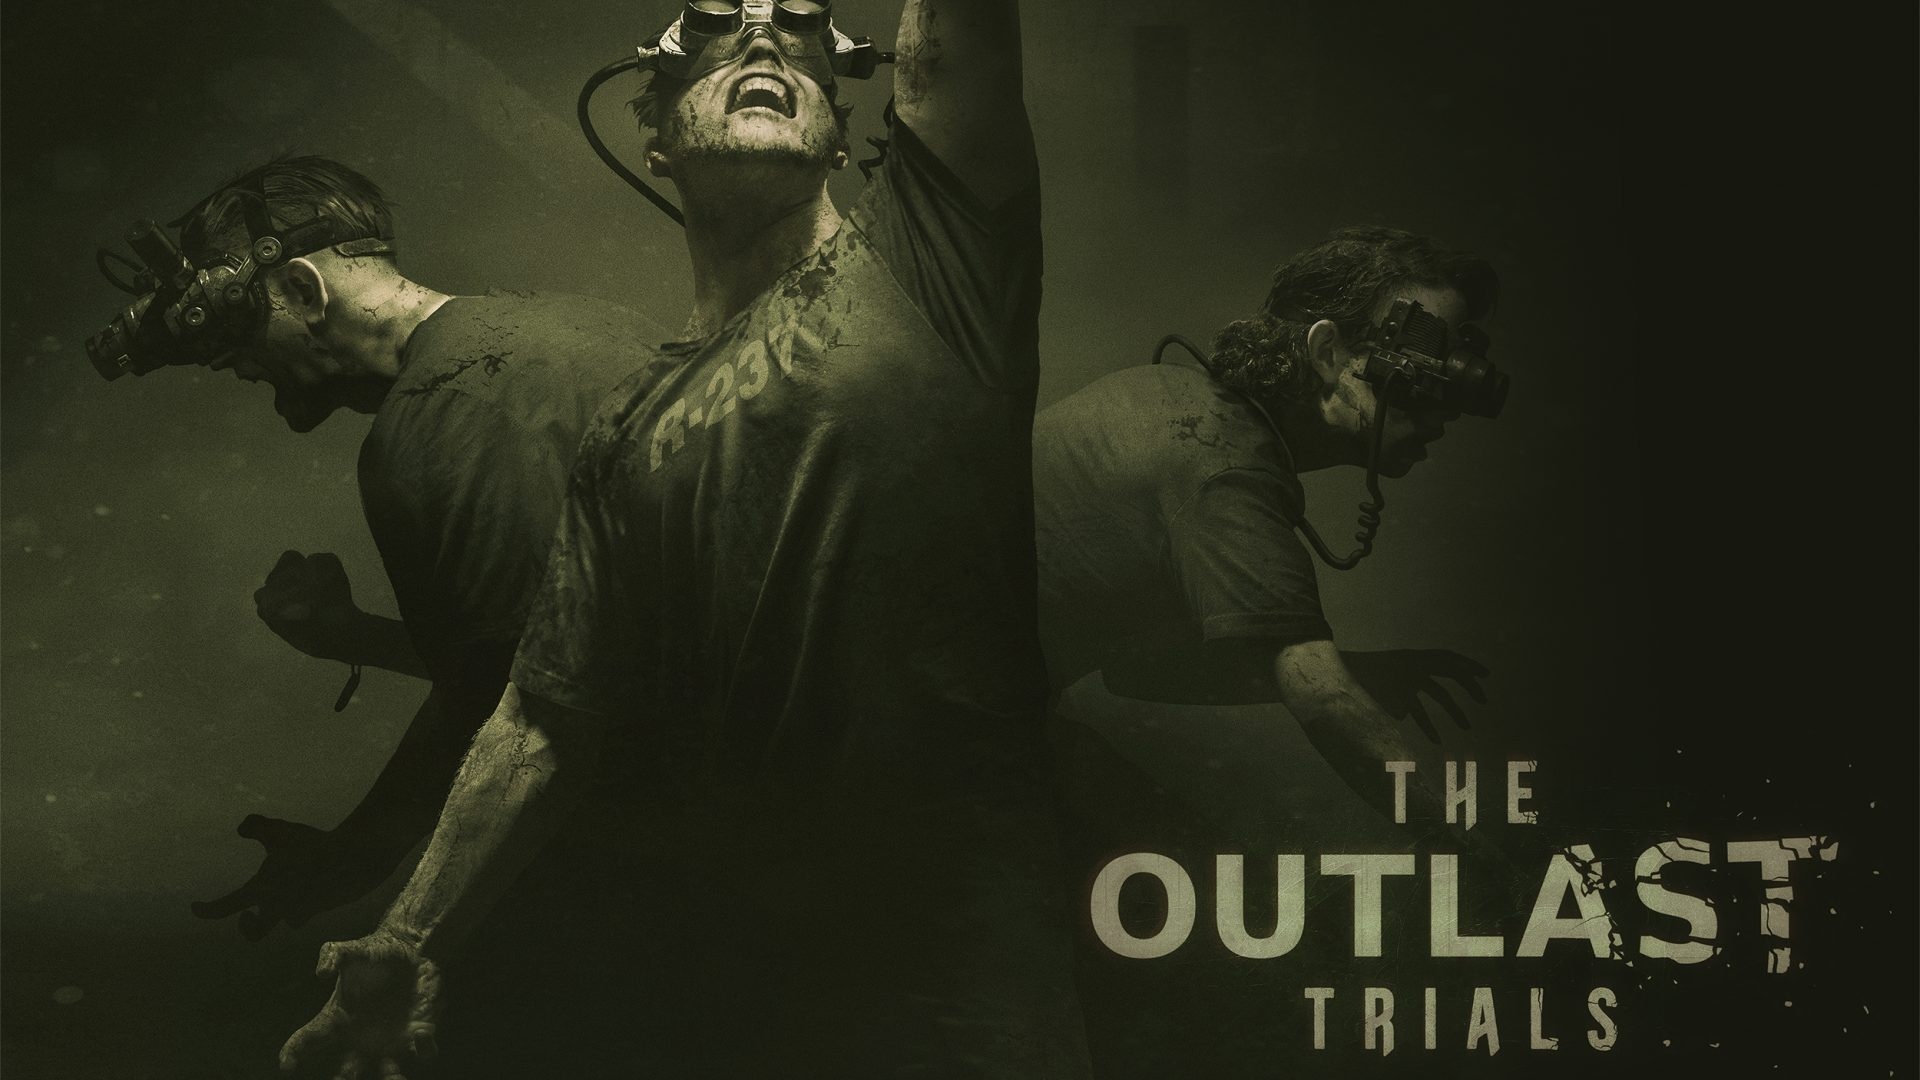 outlast trials xbox one release date